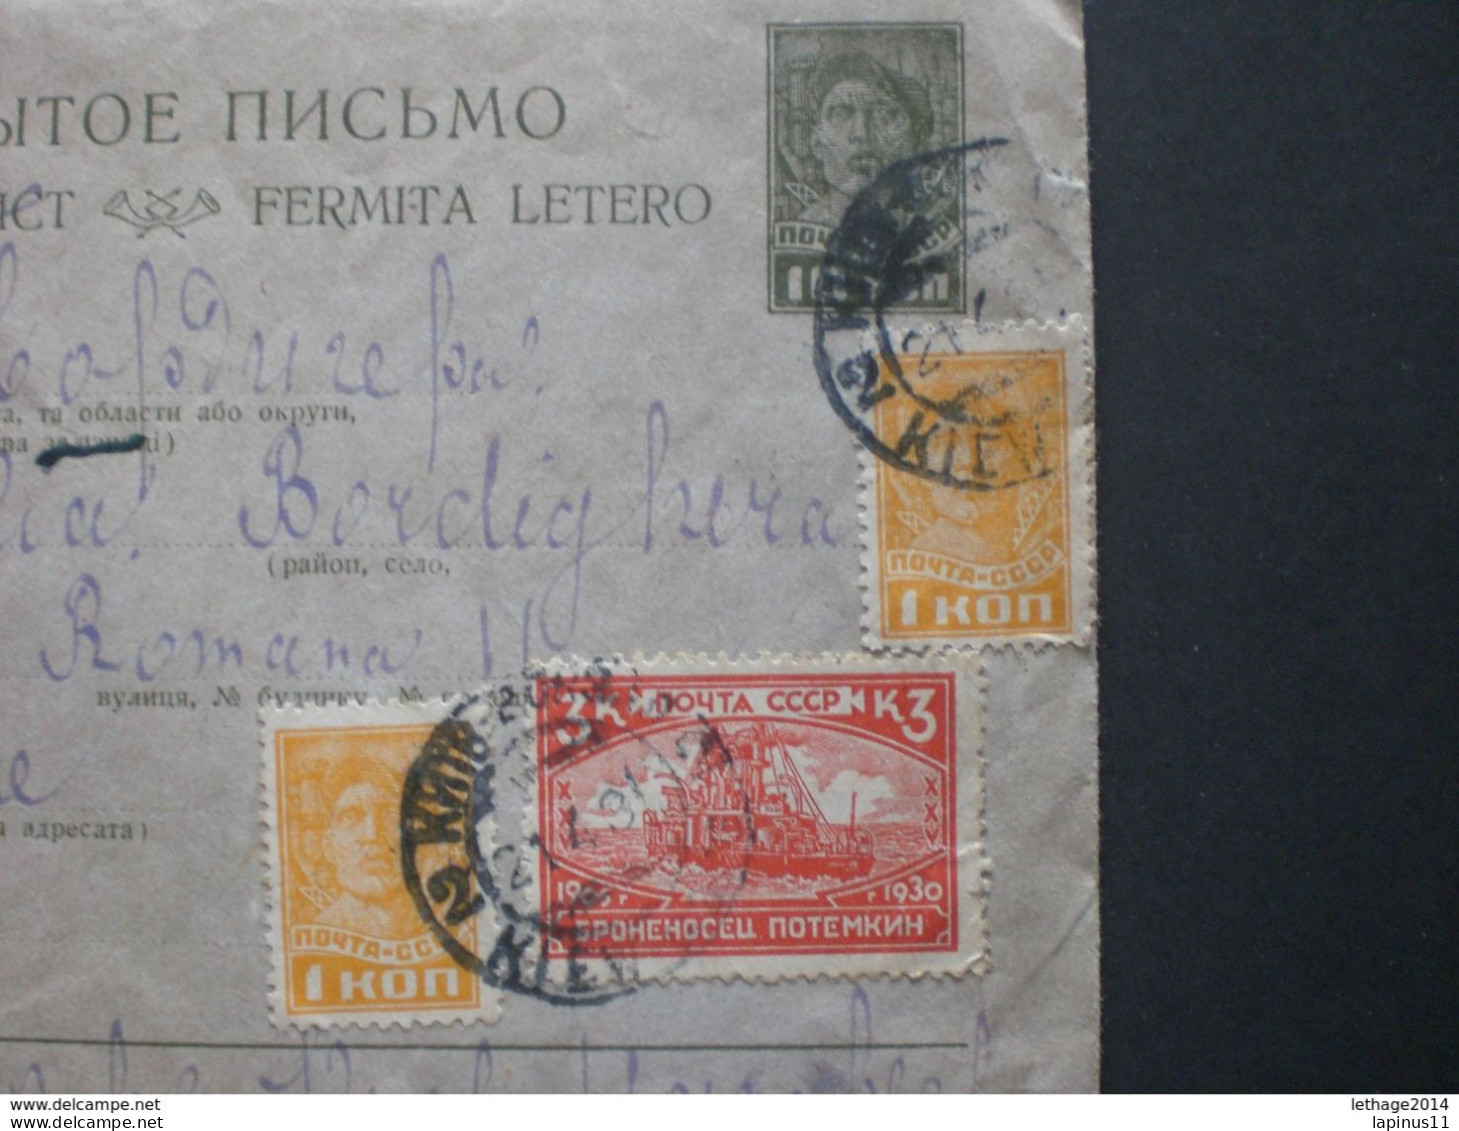 RUSSIA RUSSIE РОССИЯ STAMPS COVER 1931 REGISTER MAIL RUSSLAND TO ITALY RRR RIF. TAGG (144) - Covers & Documents